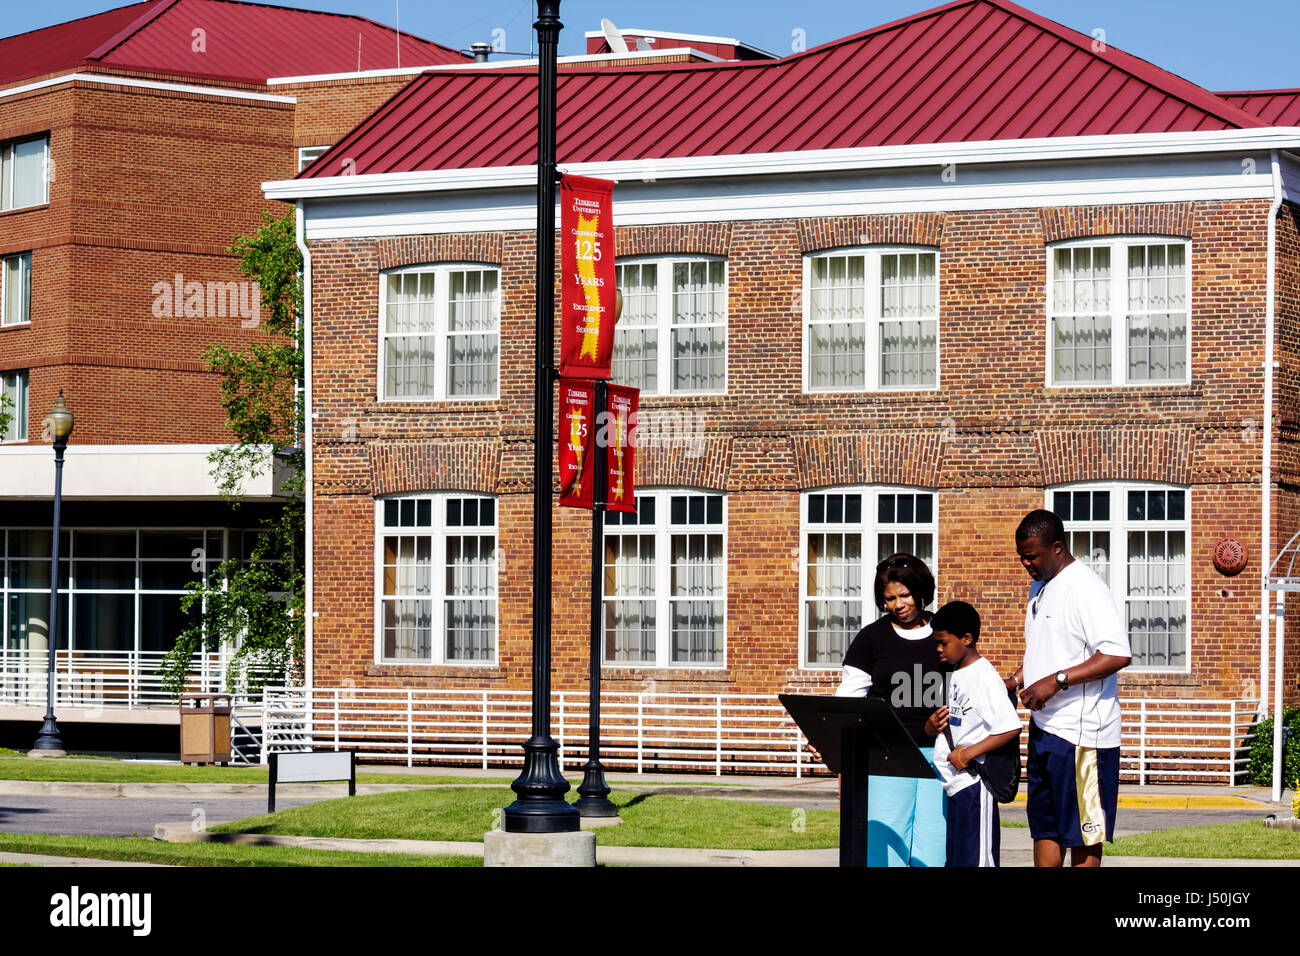 Alabama,Macon County,Tuskegee,Tuskegee Institute National Historic Site,Tuskegee University,campus,Dorothy Hall,Black man uomini maschio,donna donne donne, Foto Stock